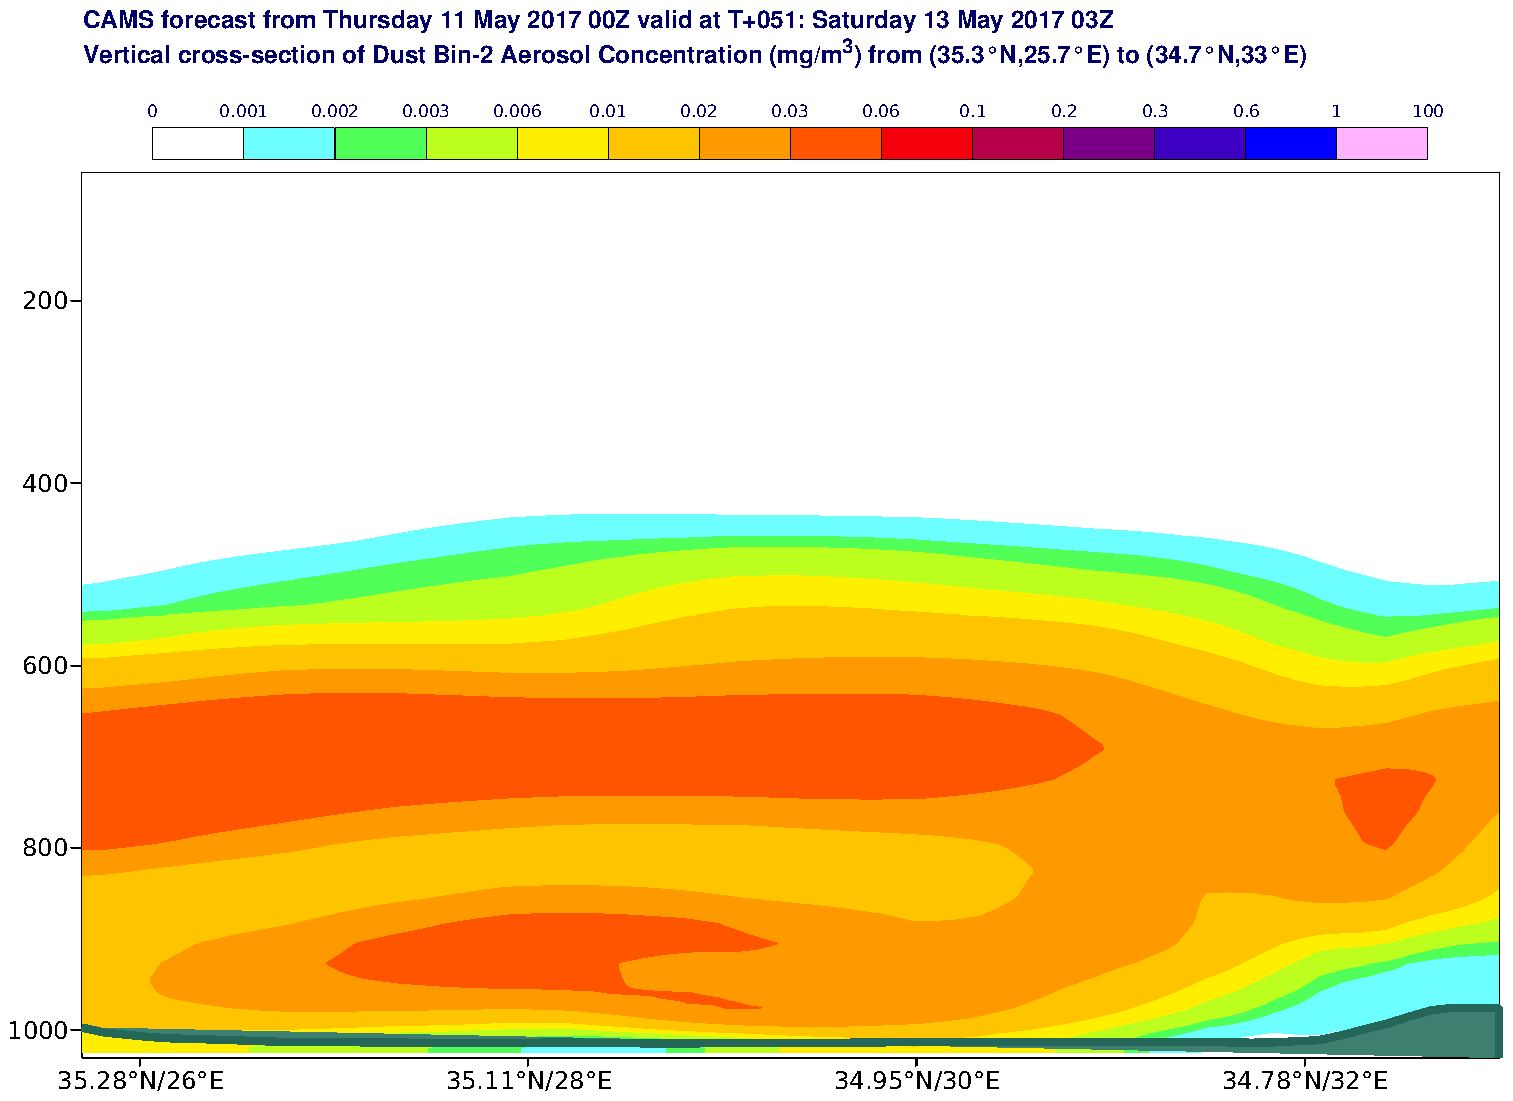 Vertical cross-section of Dust Bin-2 Aerosol Concentration (mg/m3) valid at T51 - 2017-05-13 03:00